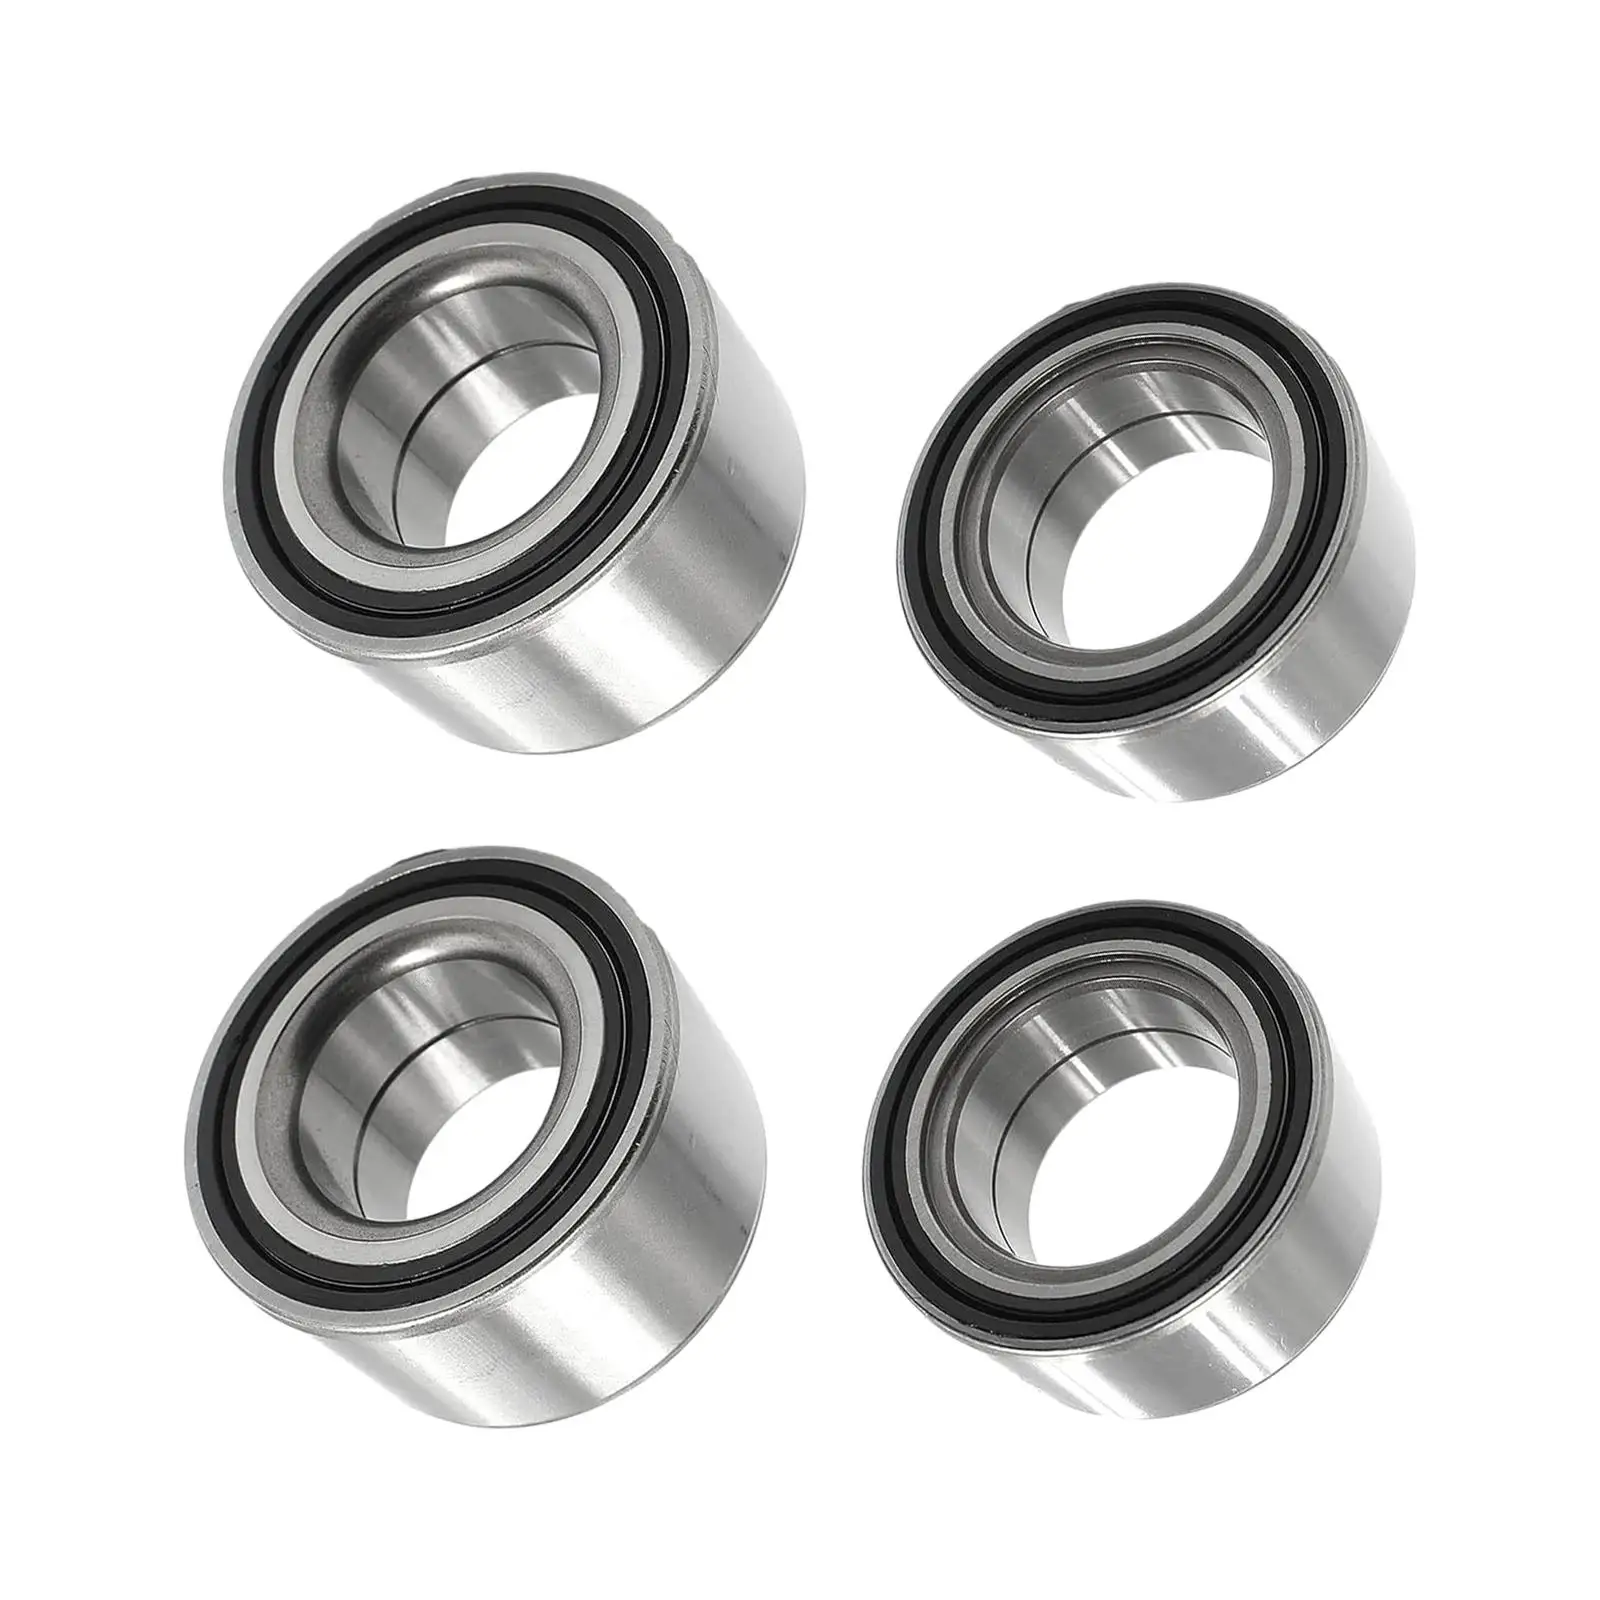 

4Pcs Front and Rear Wheel Bearings 3514627 Accessories 3514699 for RZR S 800 RZR 4 800 Direct Replacement Easily Install